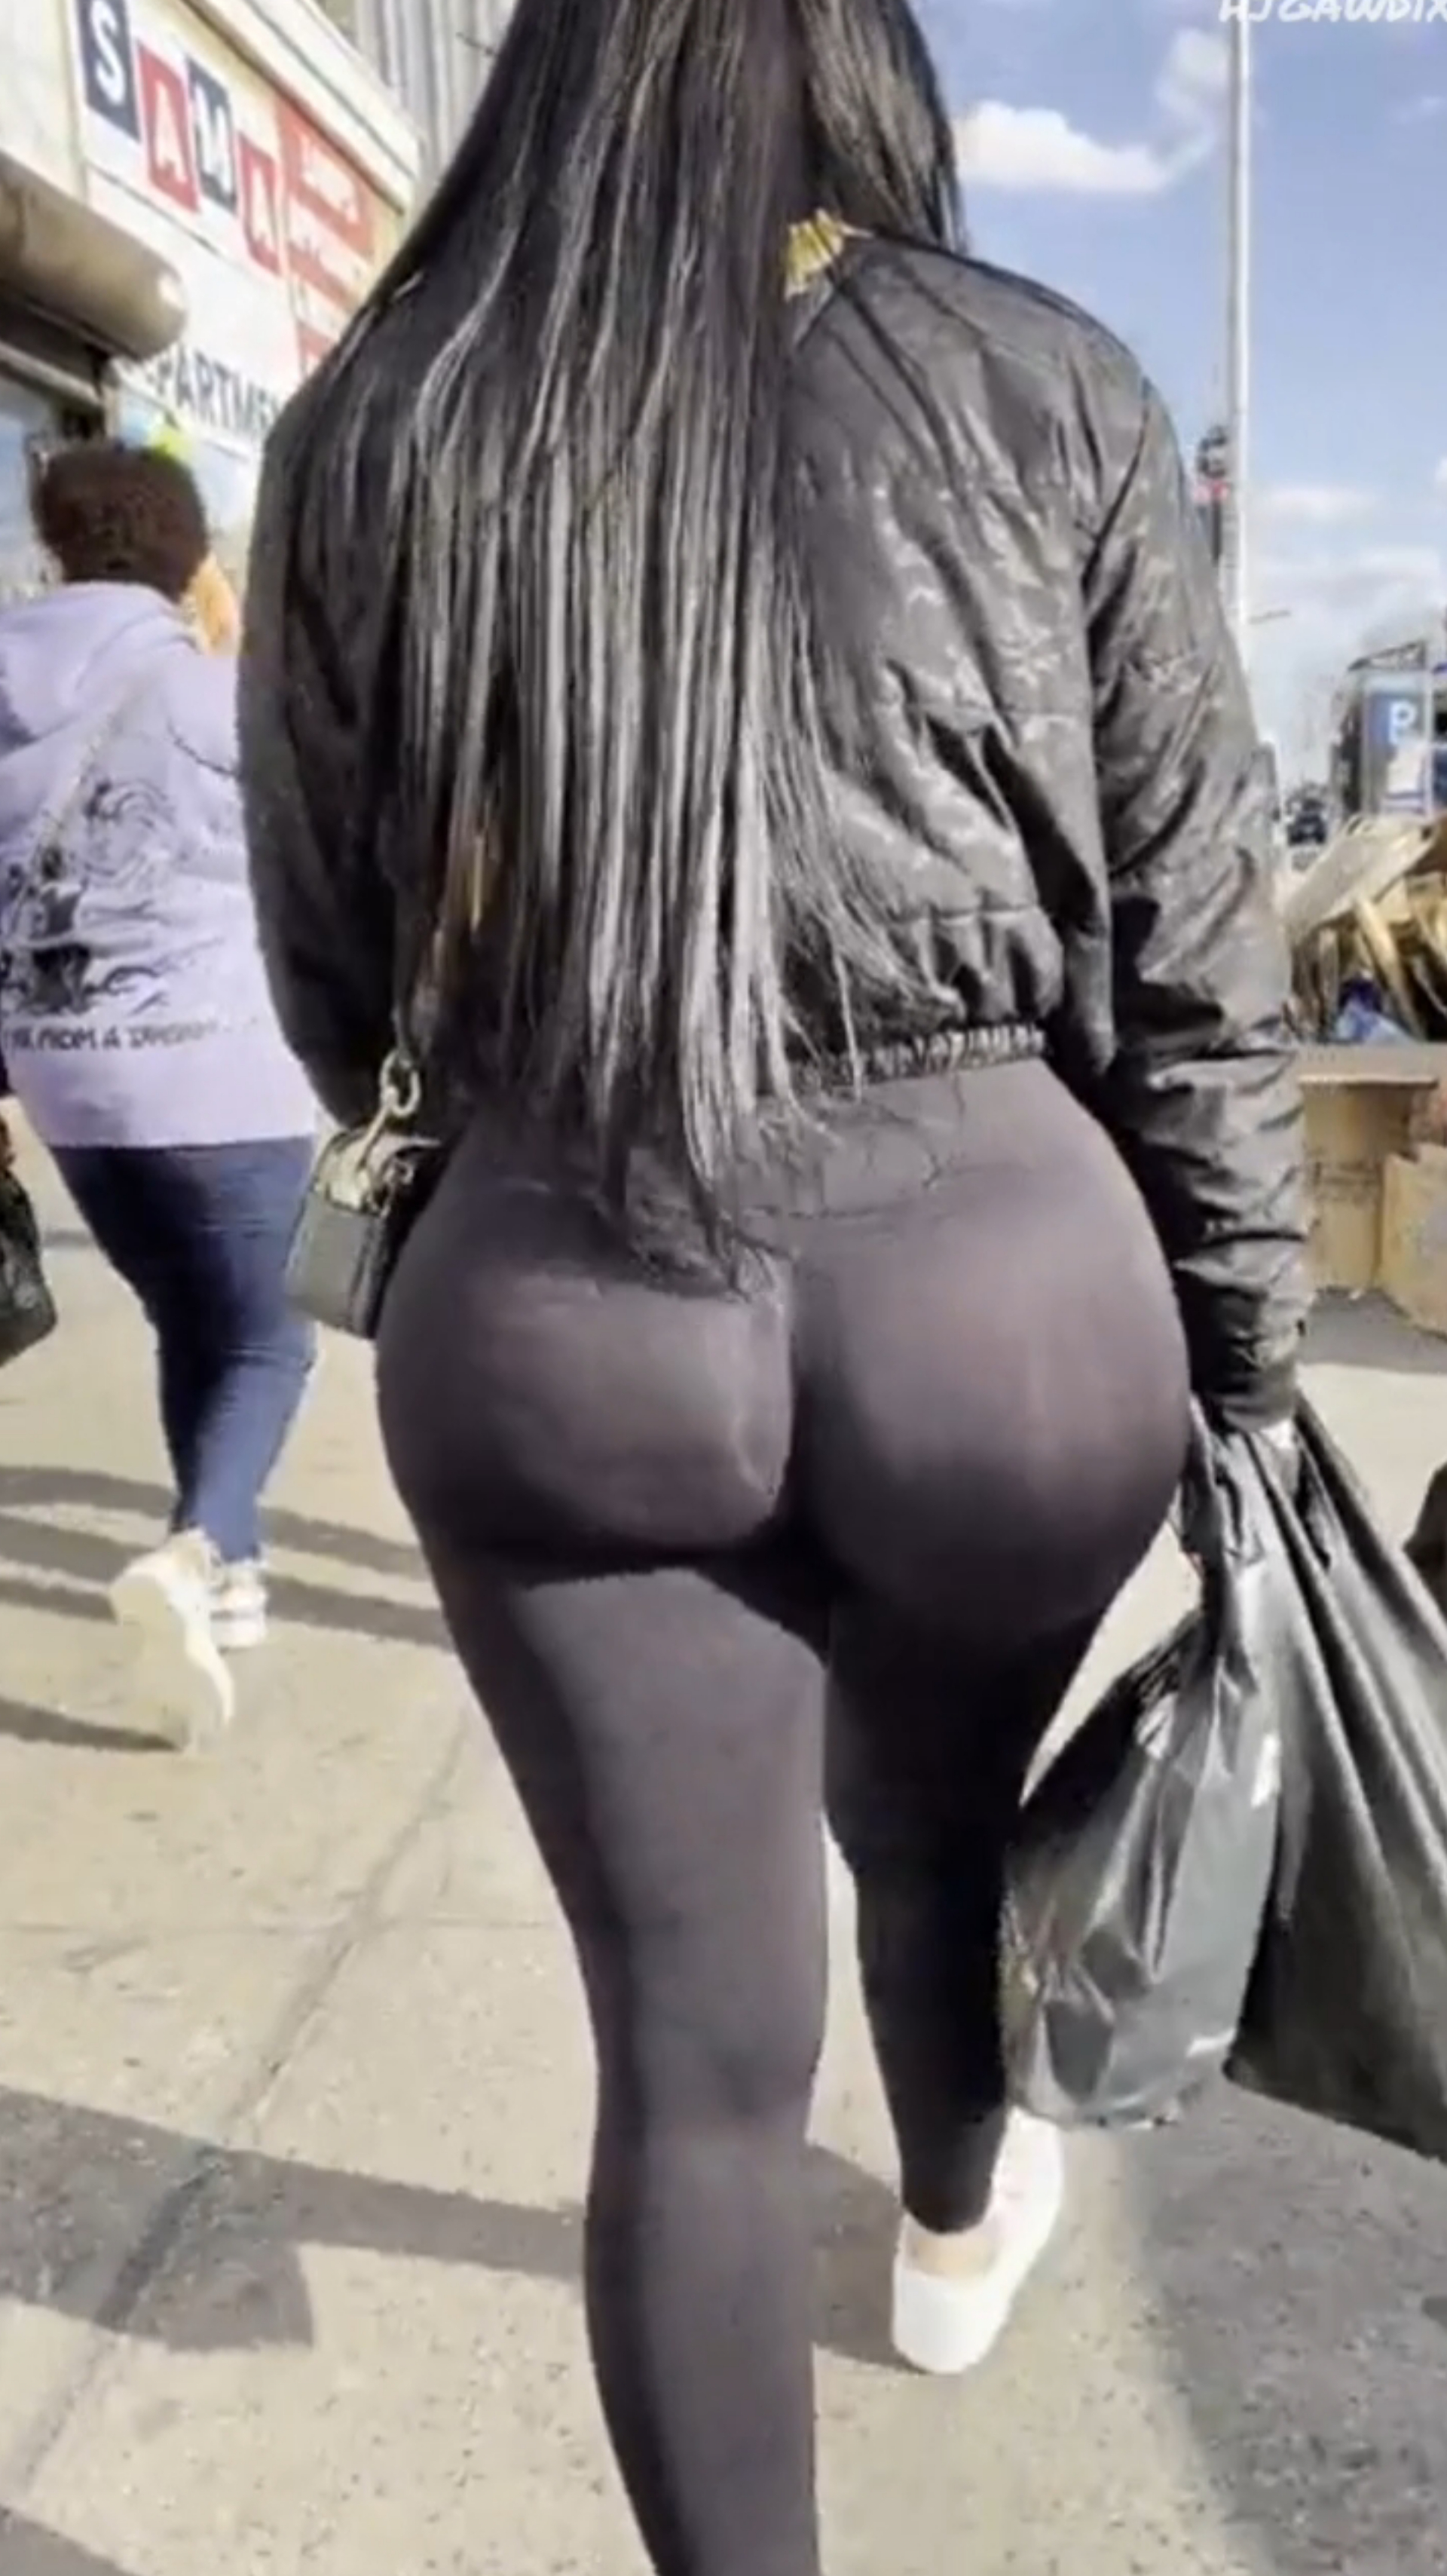 SEXY BIG BUBBLE BOOTY CAPTURE